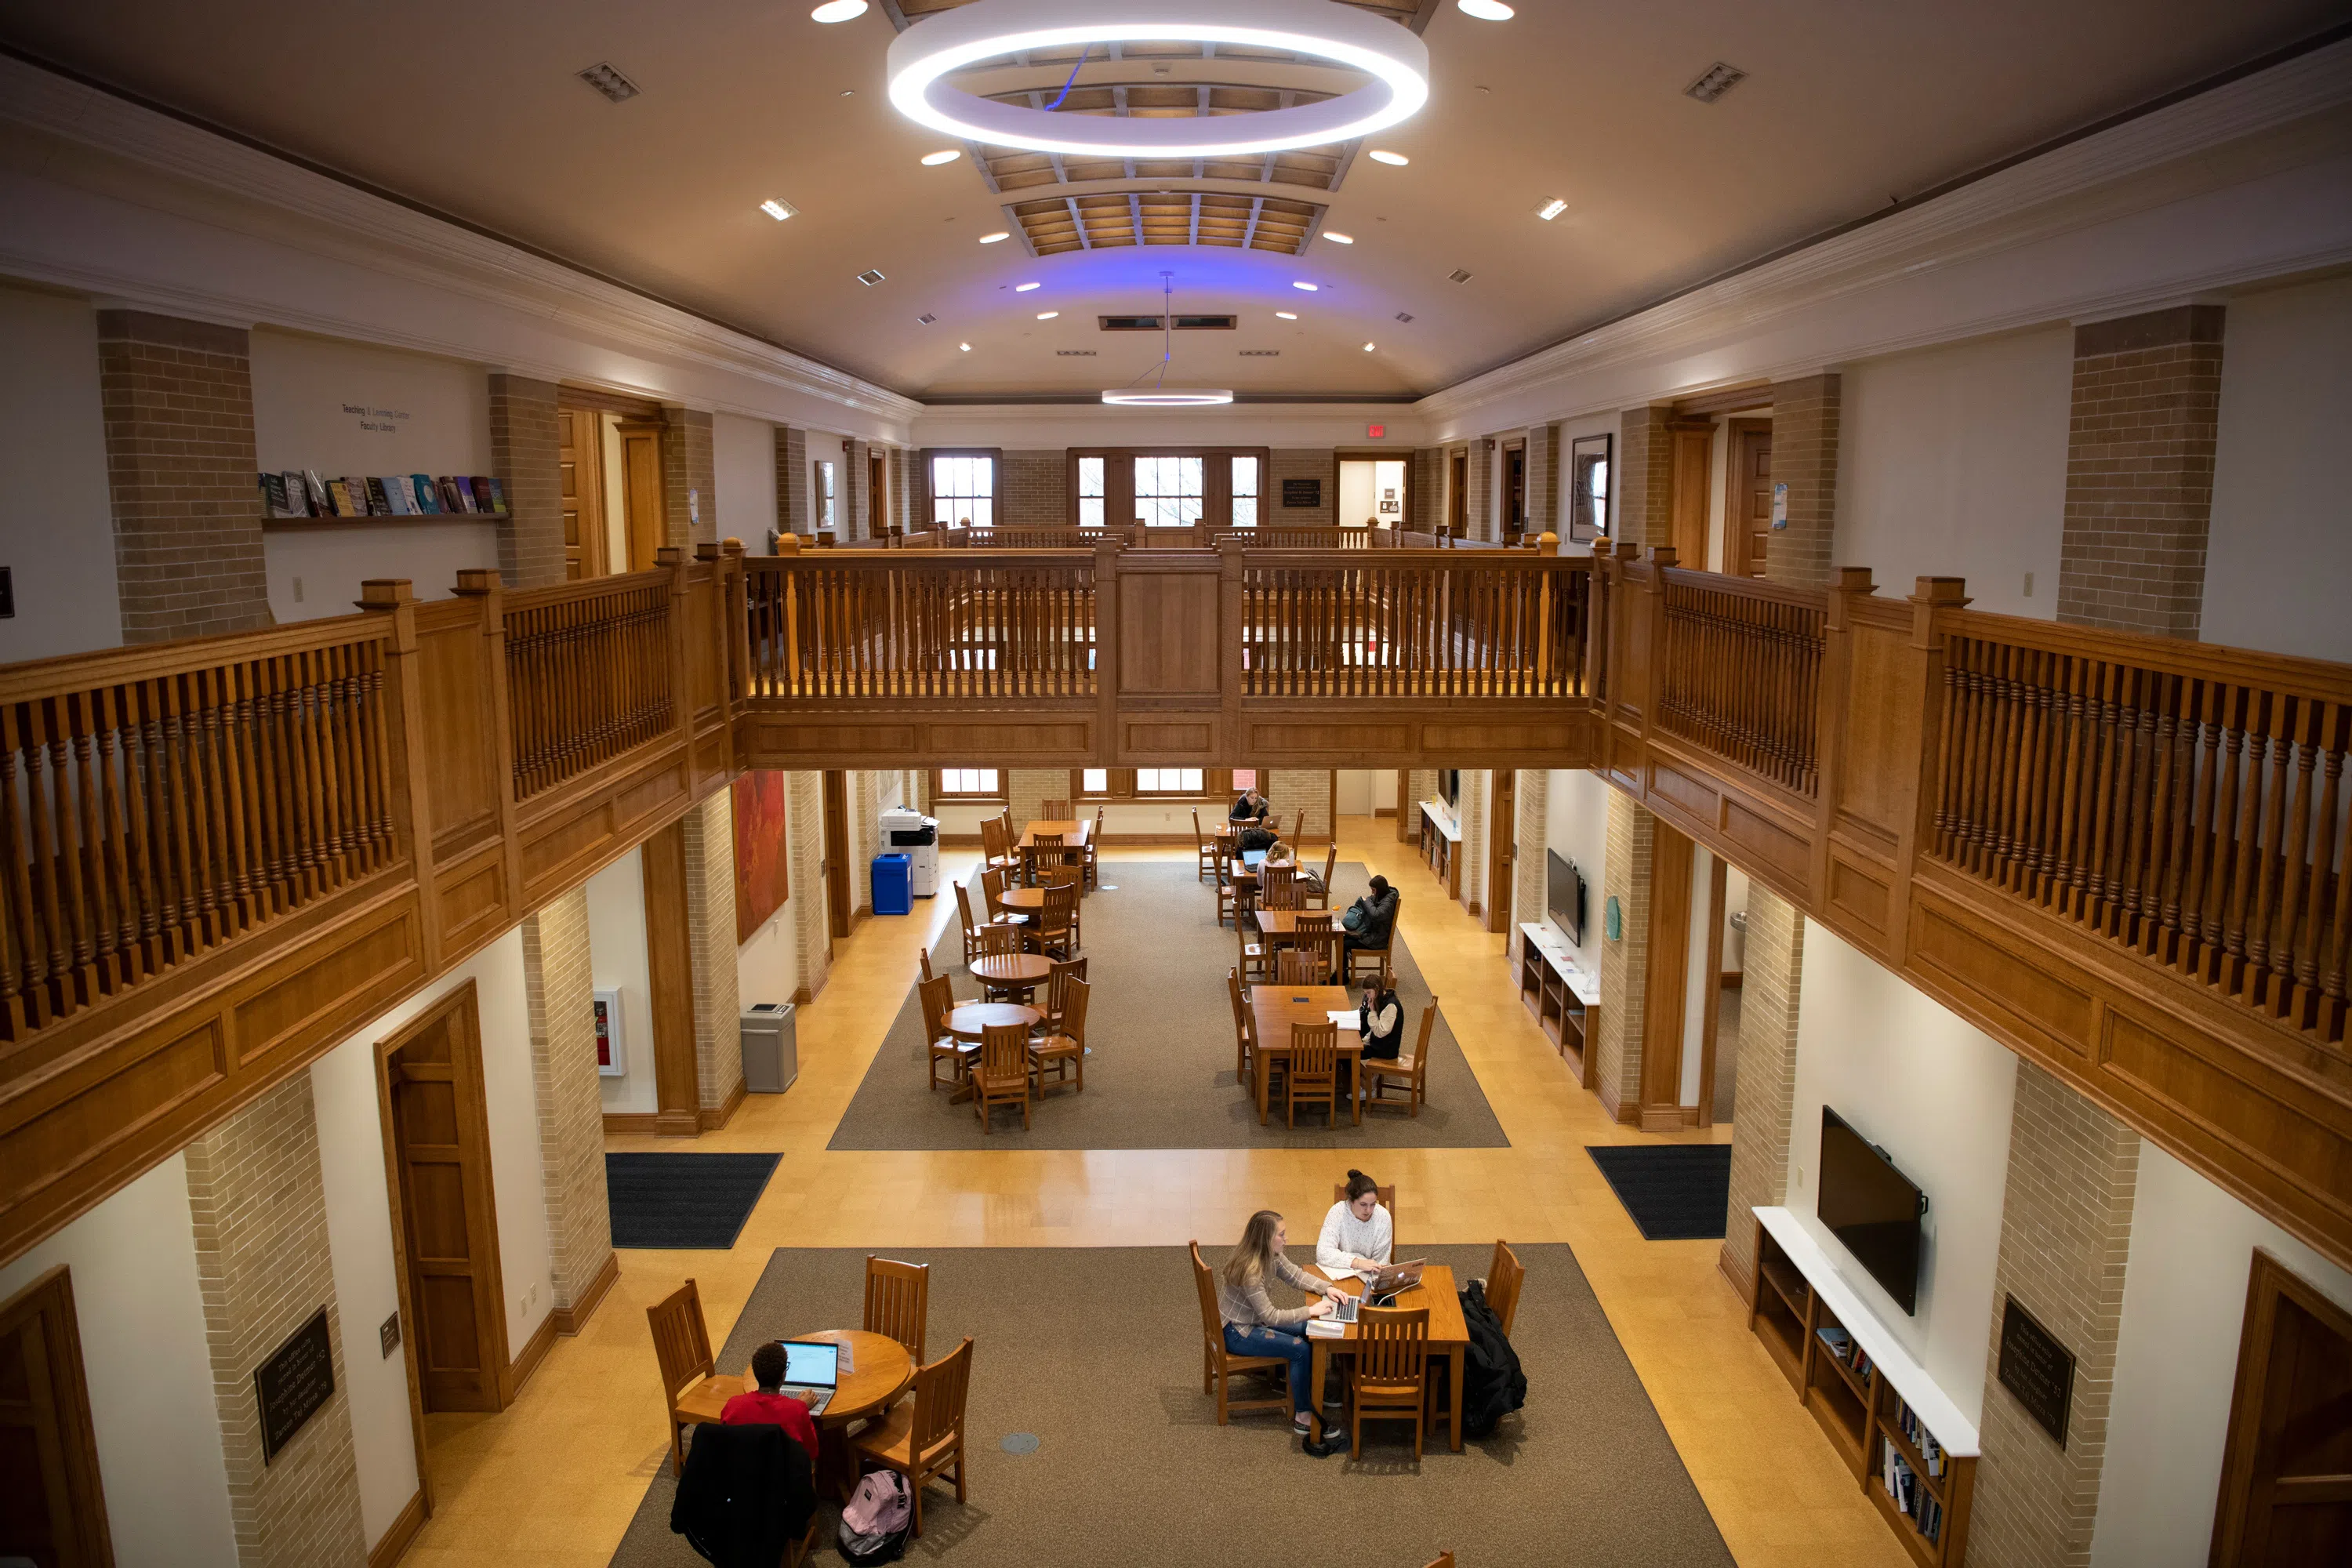 students study at tables in a large room